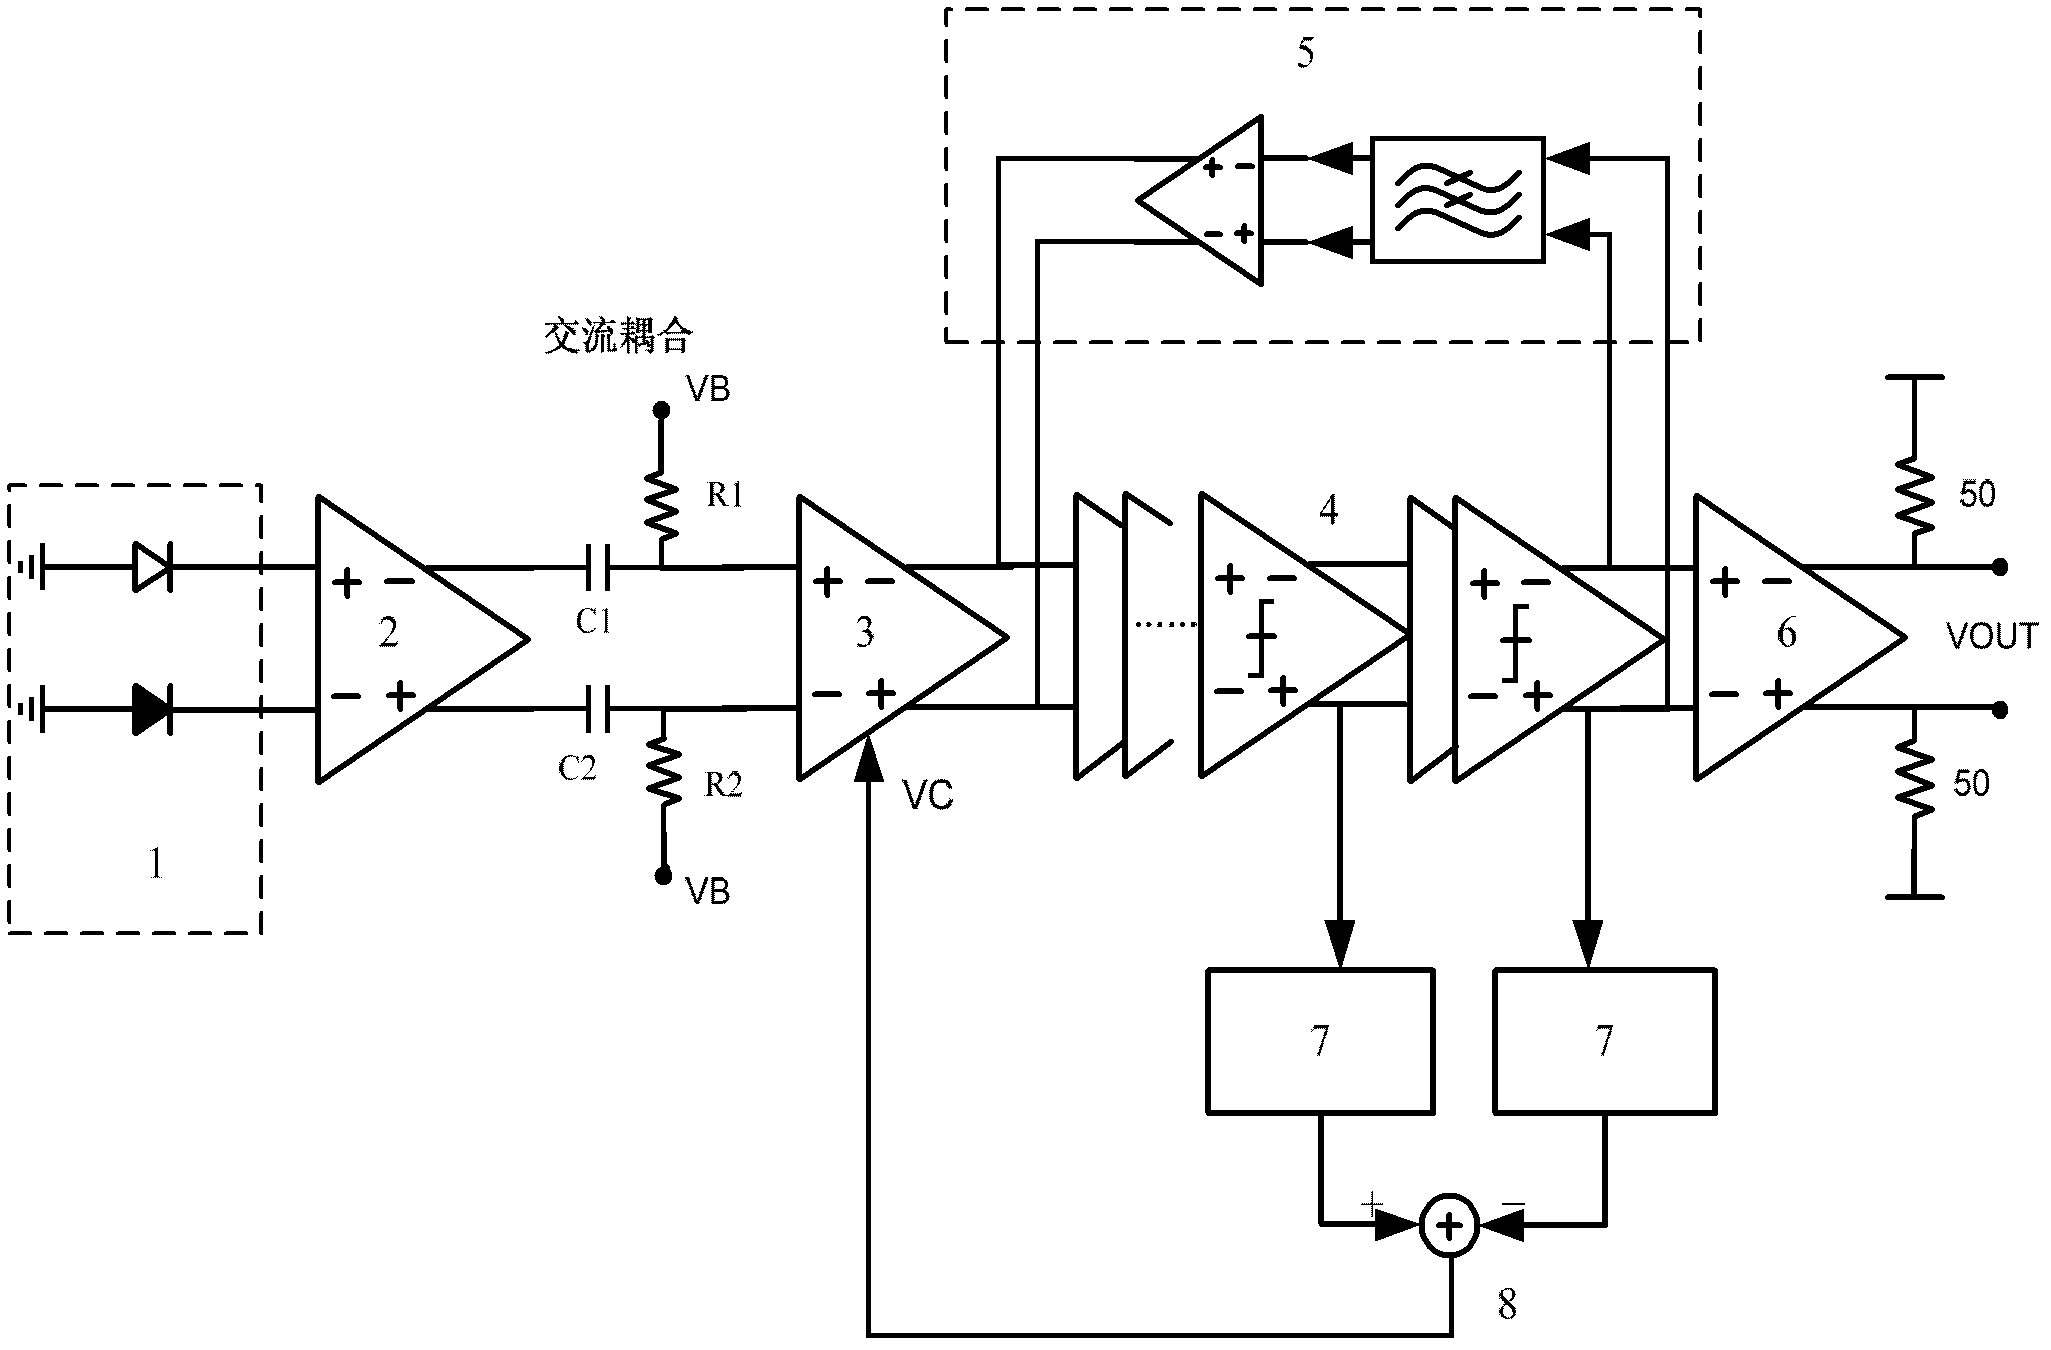 Fully-integrated photoelectric conversion receiver based on standard CMOS (complementary metal-oxide-semiconductor transistor) process